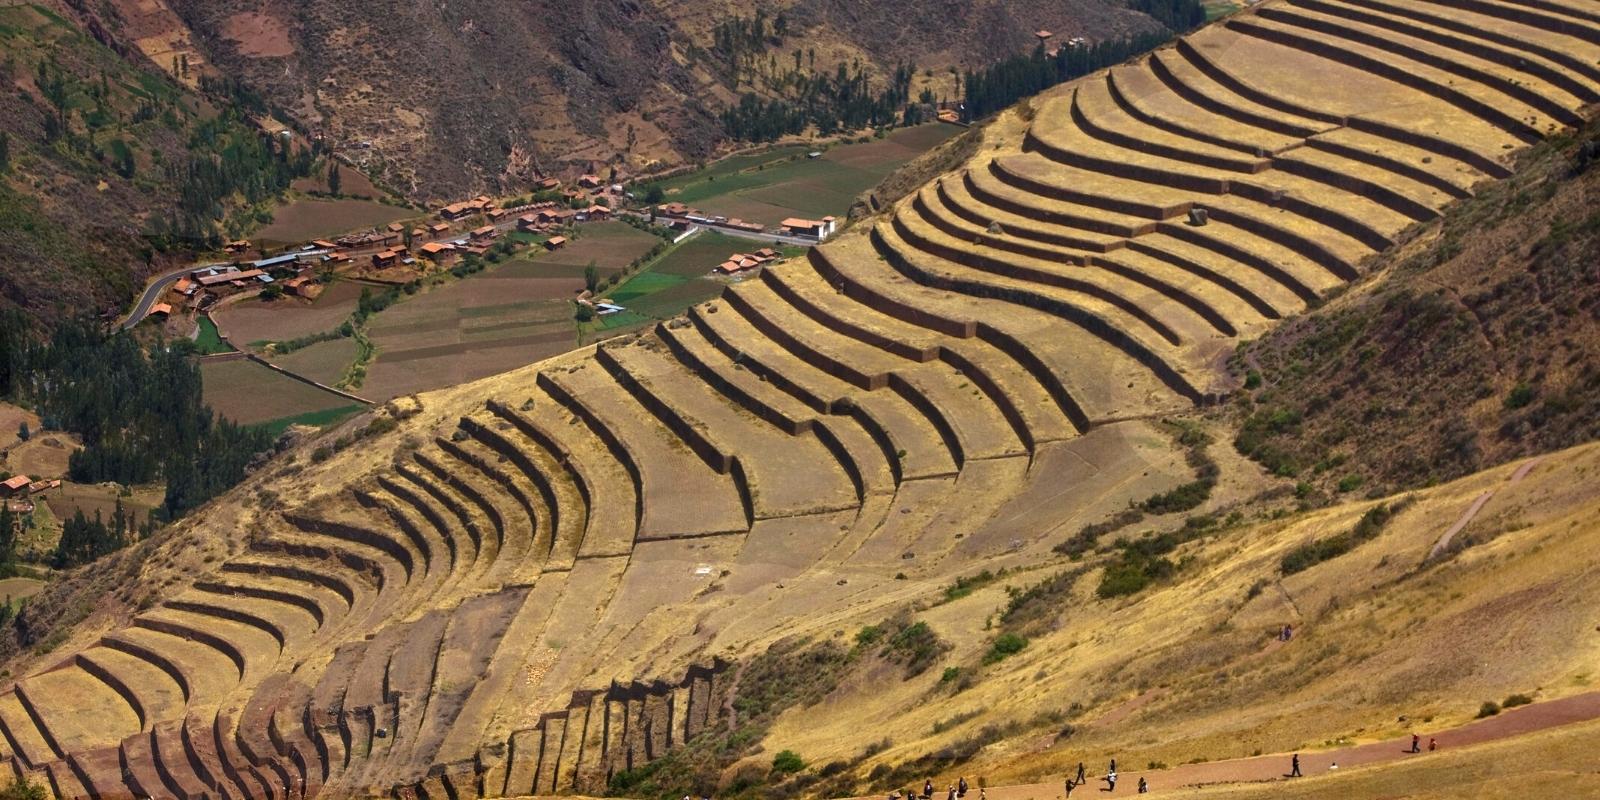 incas agriculture technology by inca trail expeditions (1)